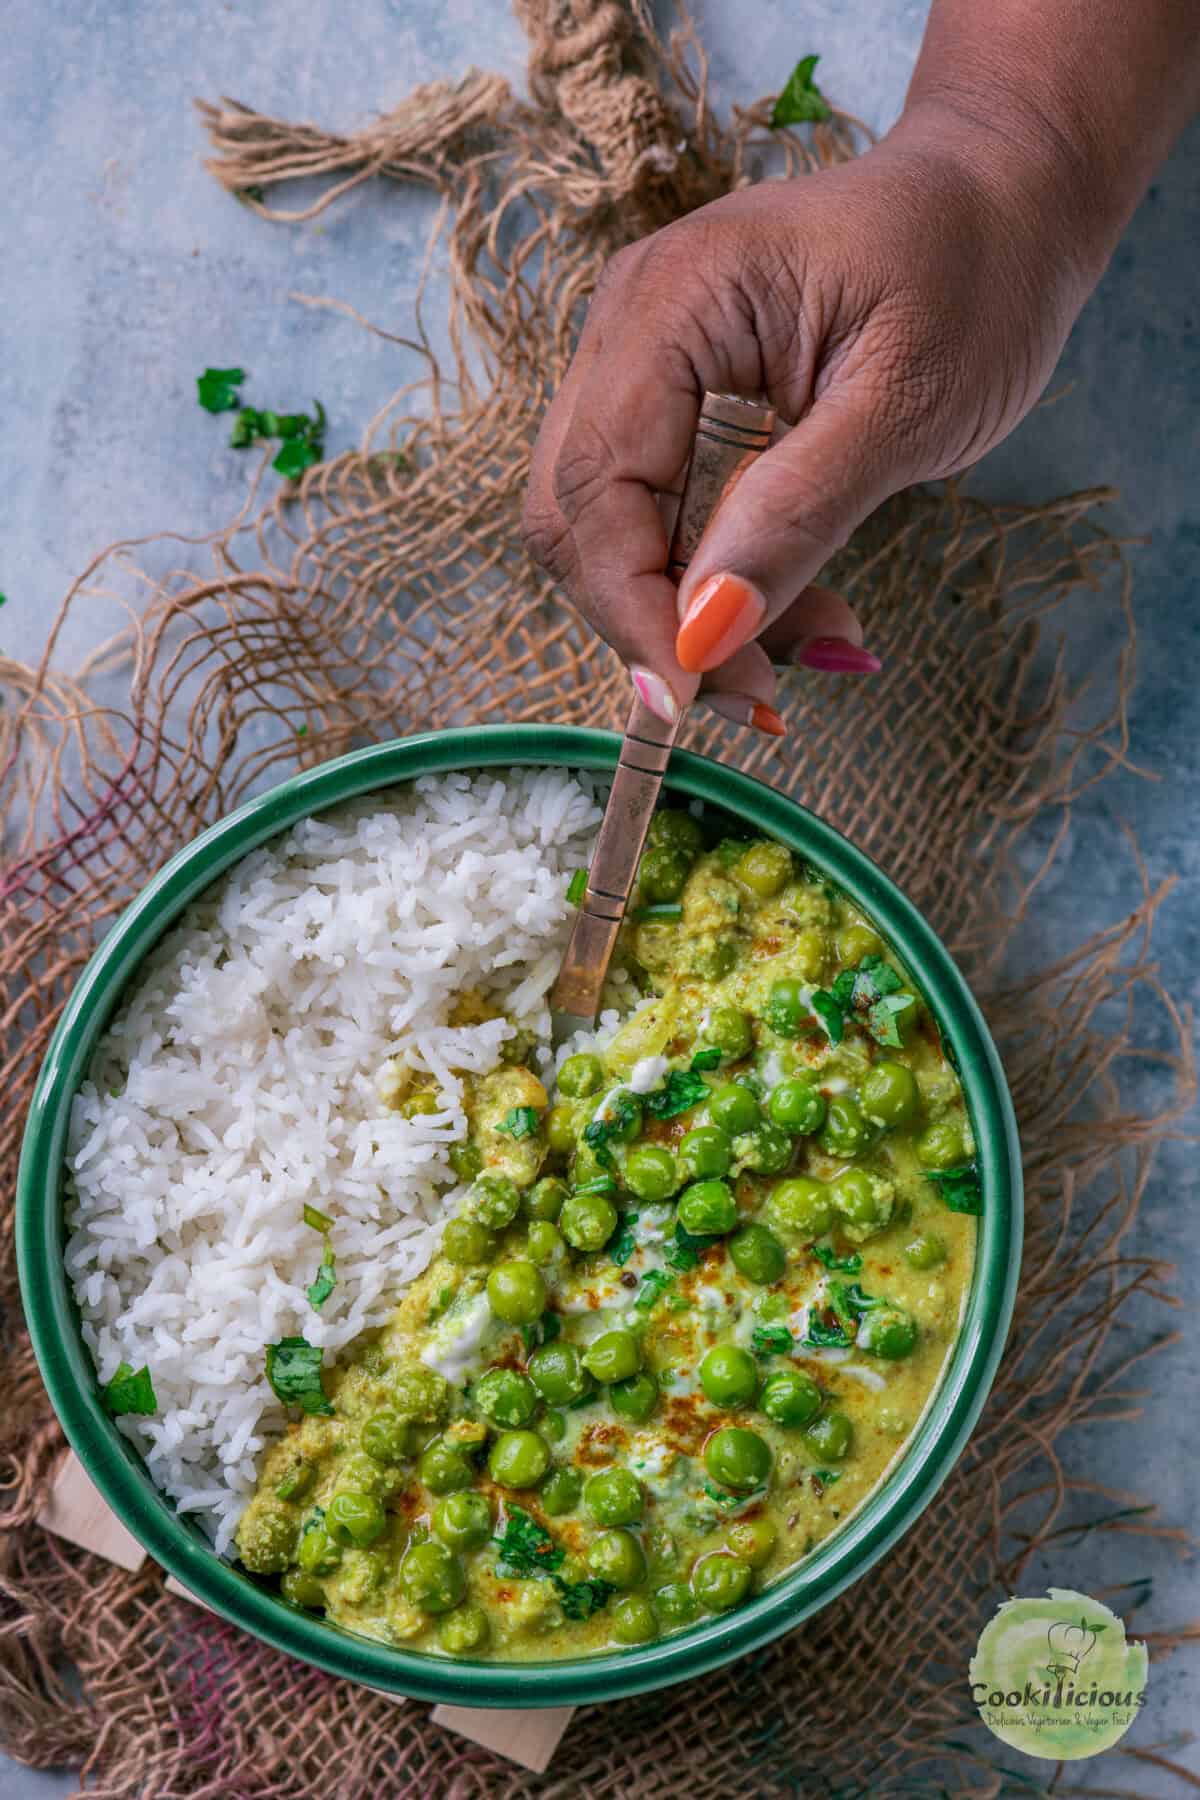 A hand holding a spoon and digging into a plate of Kovalam Matar and rice.